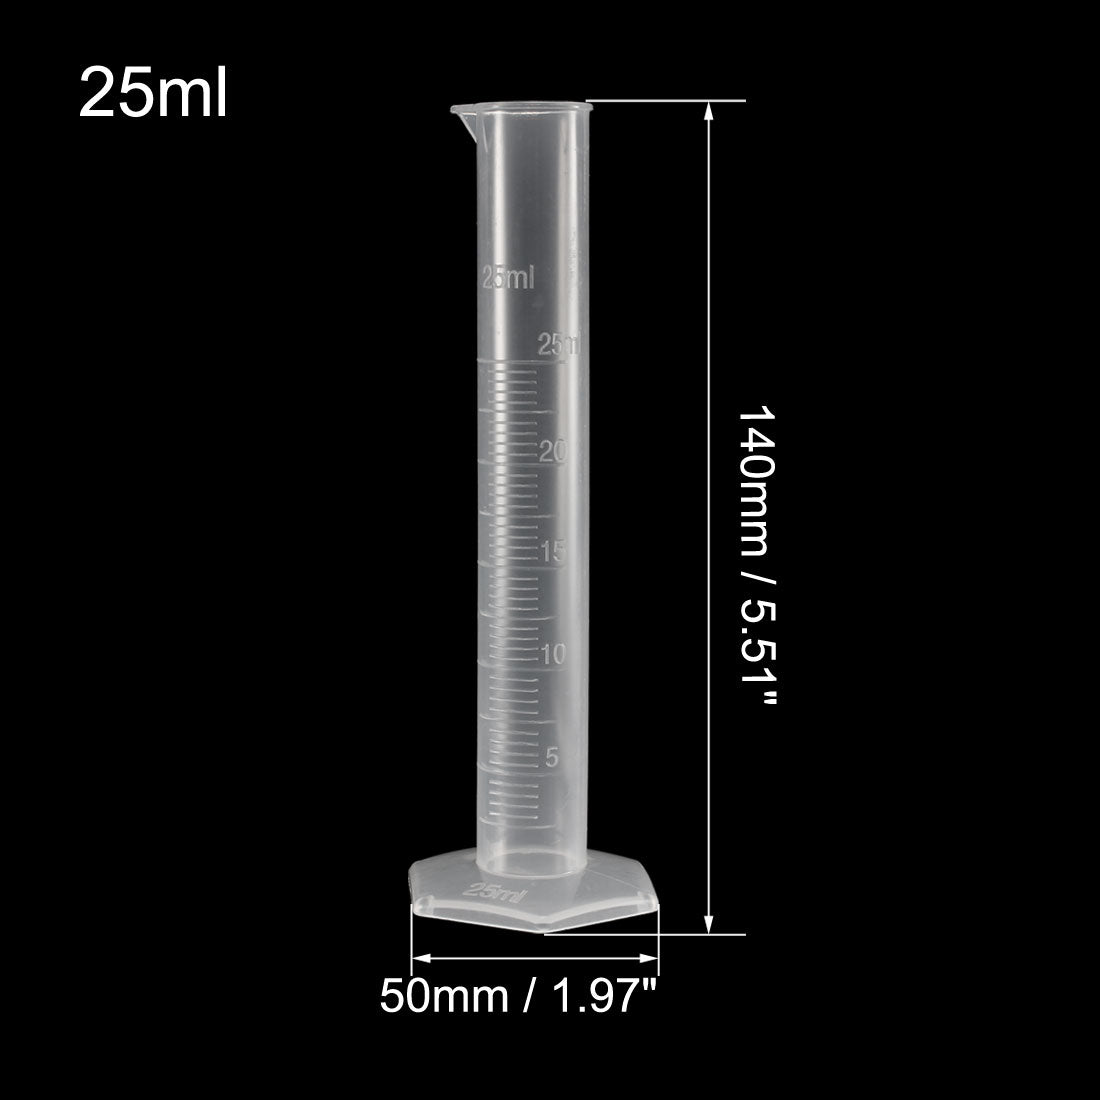 uxcell Uxcell 25ml Laboratory Measurements Clear White Plastic Hex Base Graduated Cylinder for Chemical Measuring 3 Pcs